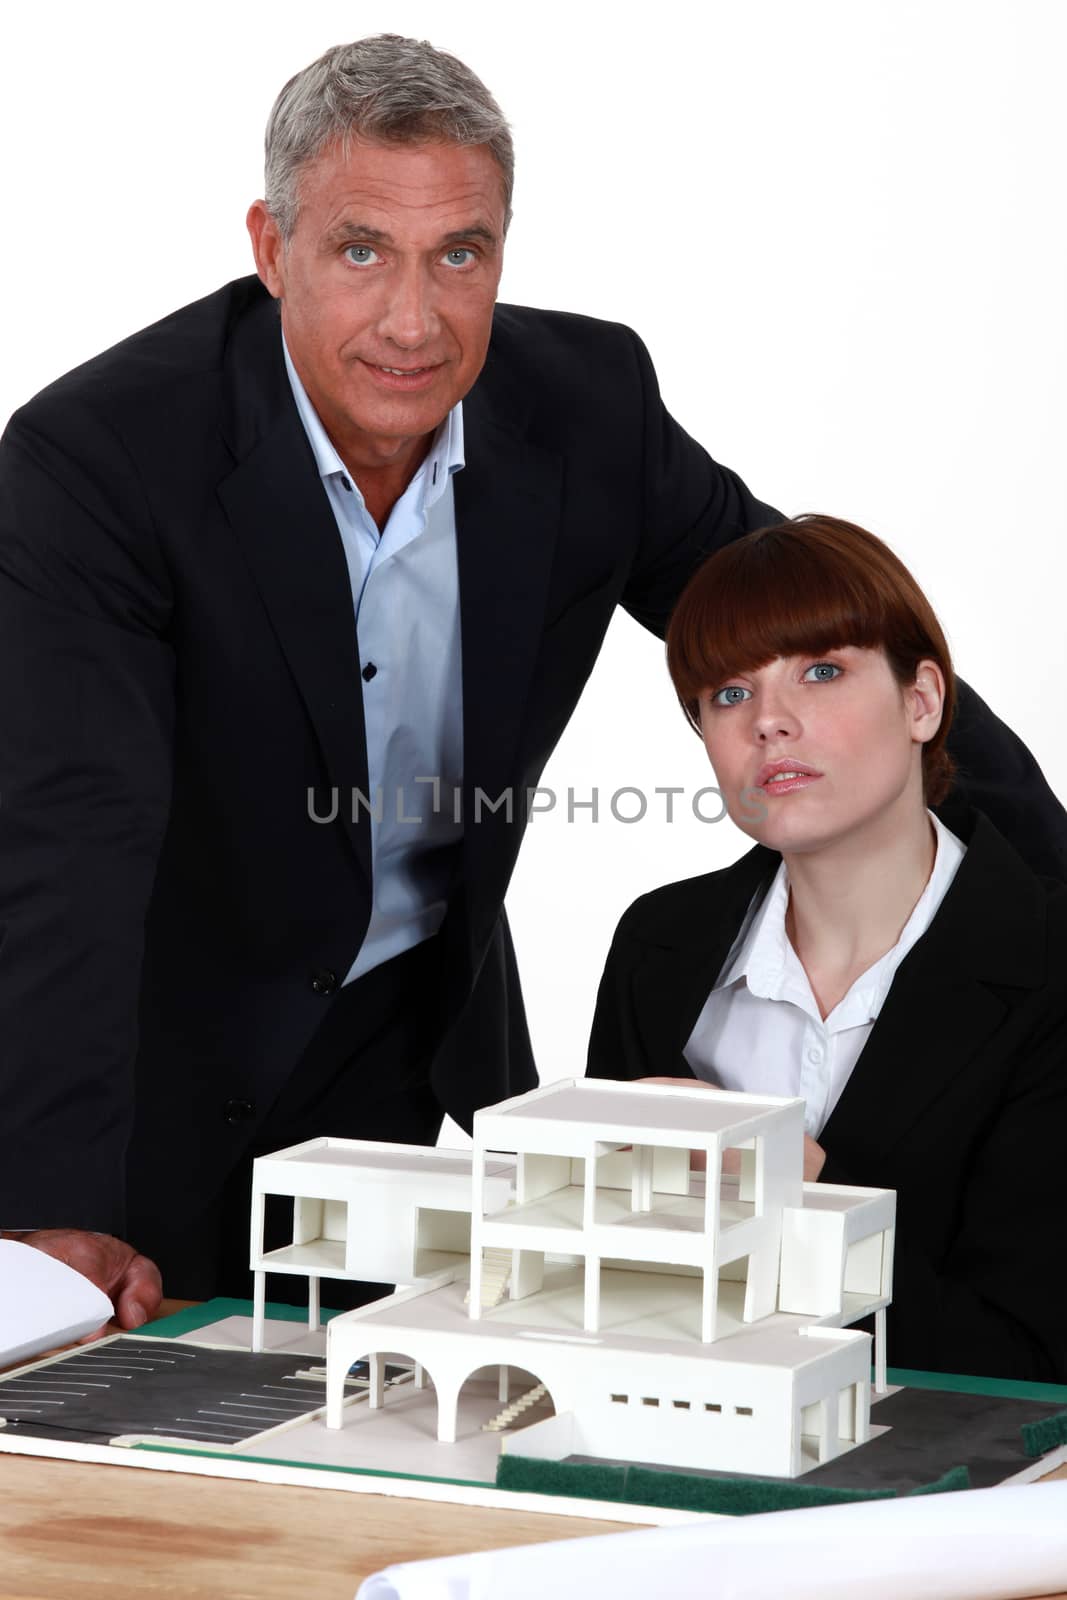 Architects posing with a building model by phovoir